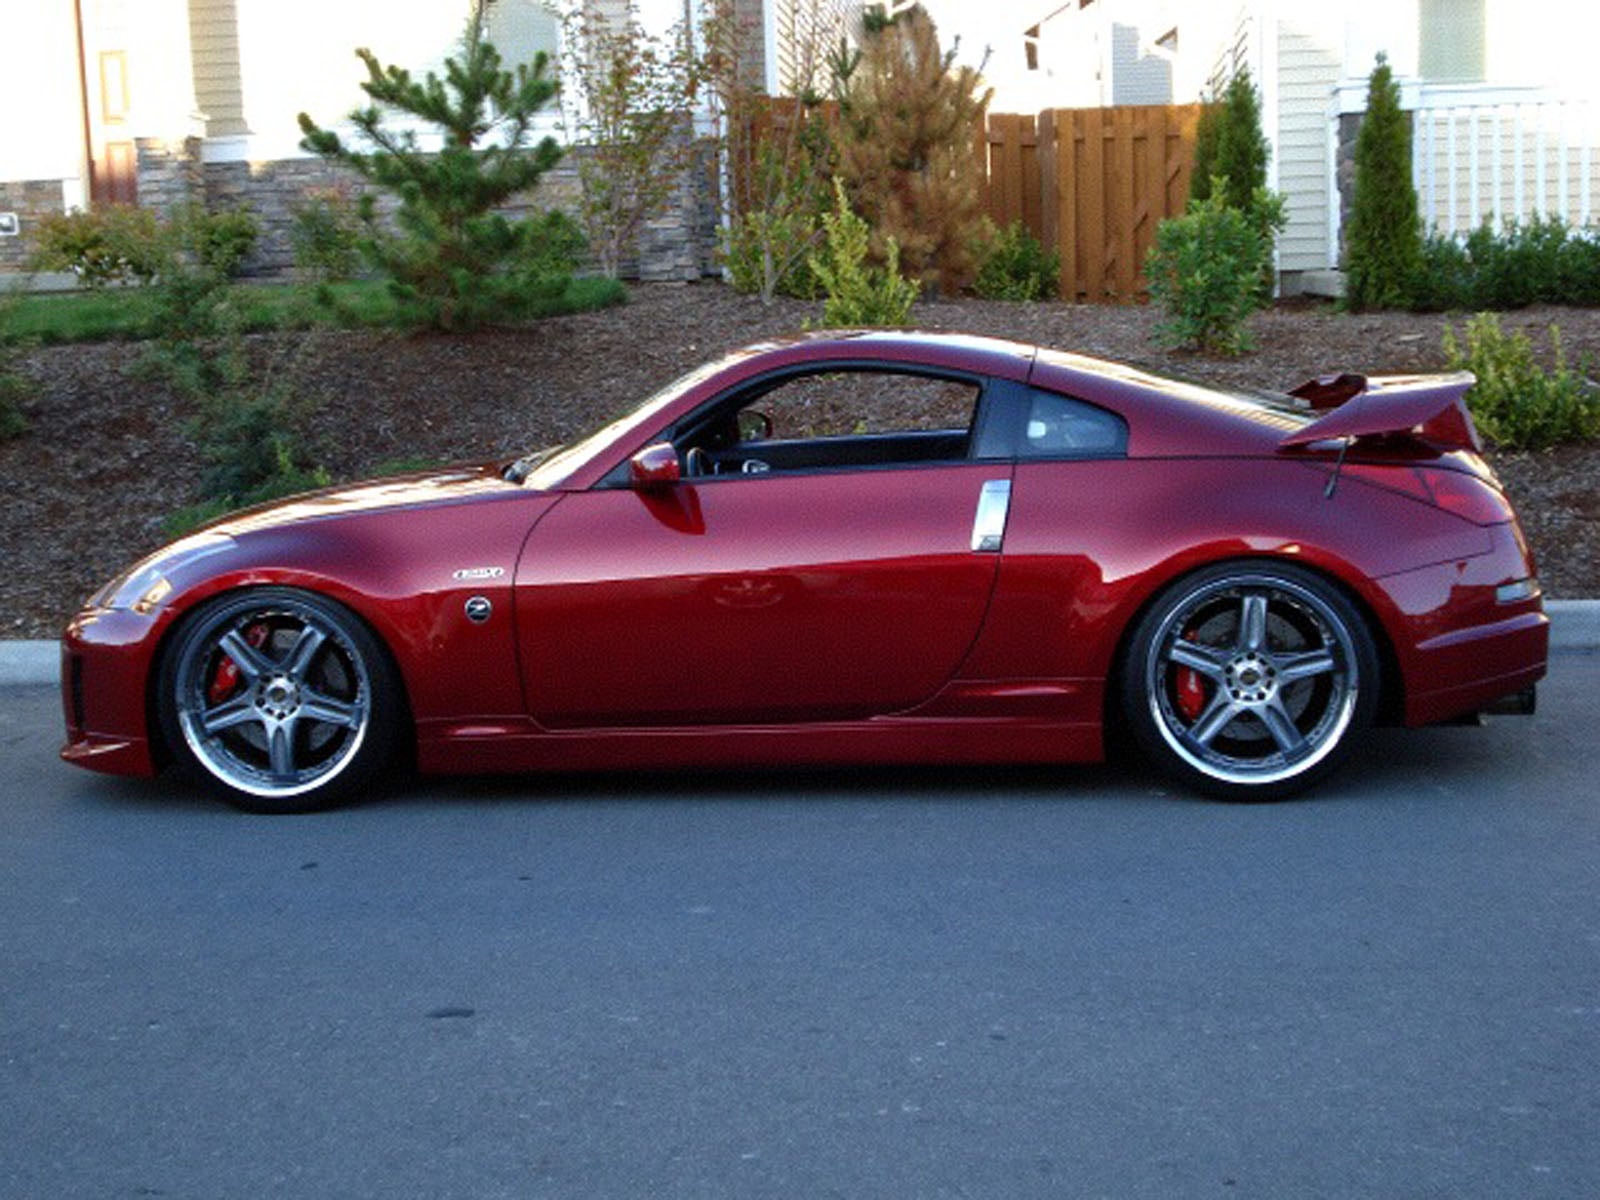 Modified nissan 350z for sale uk #5